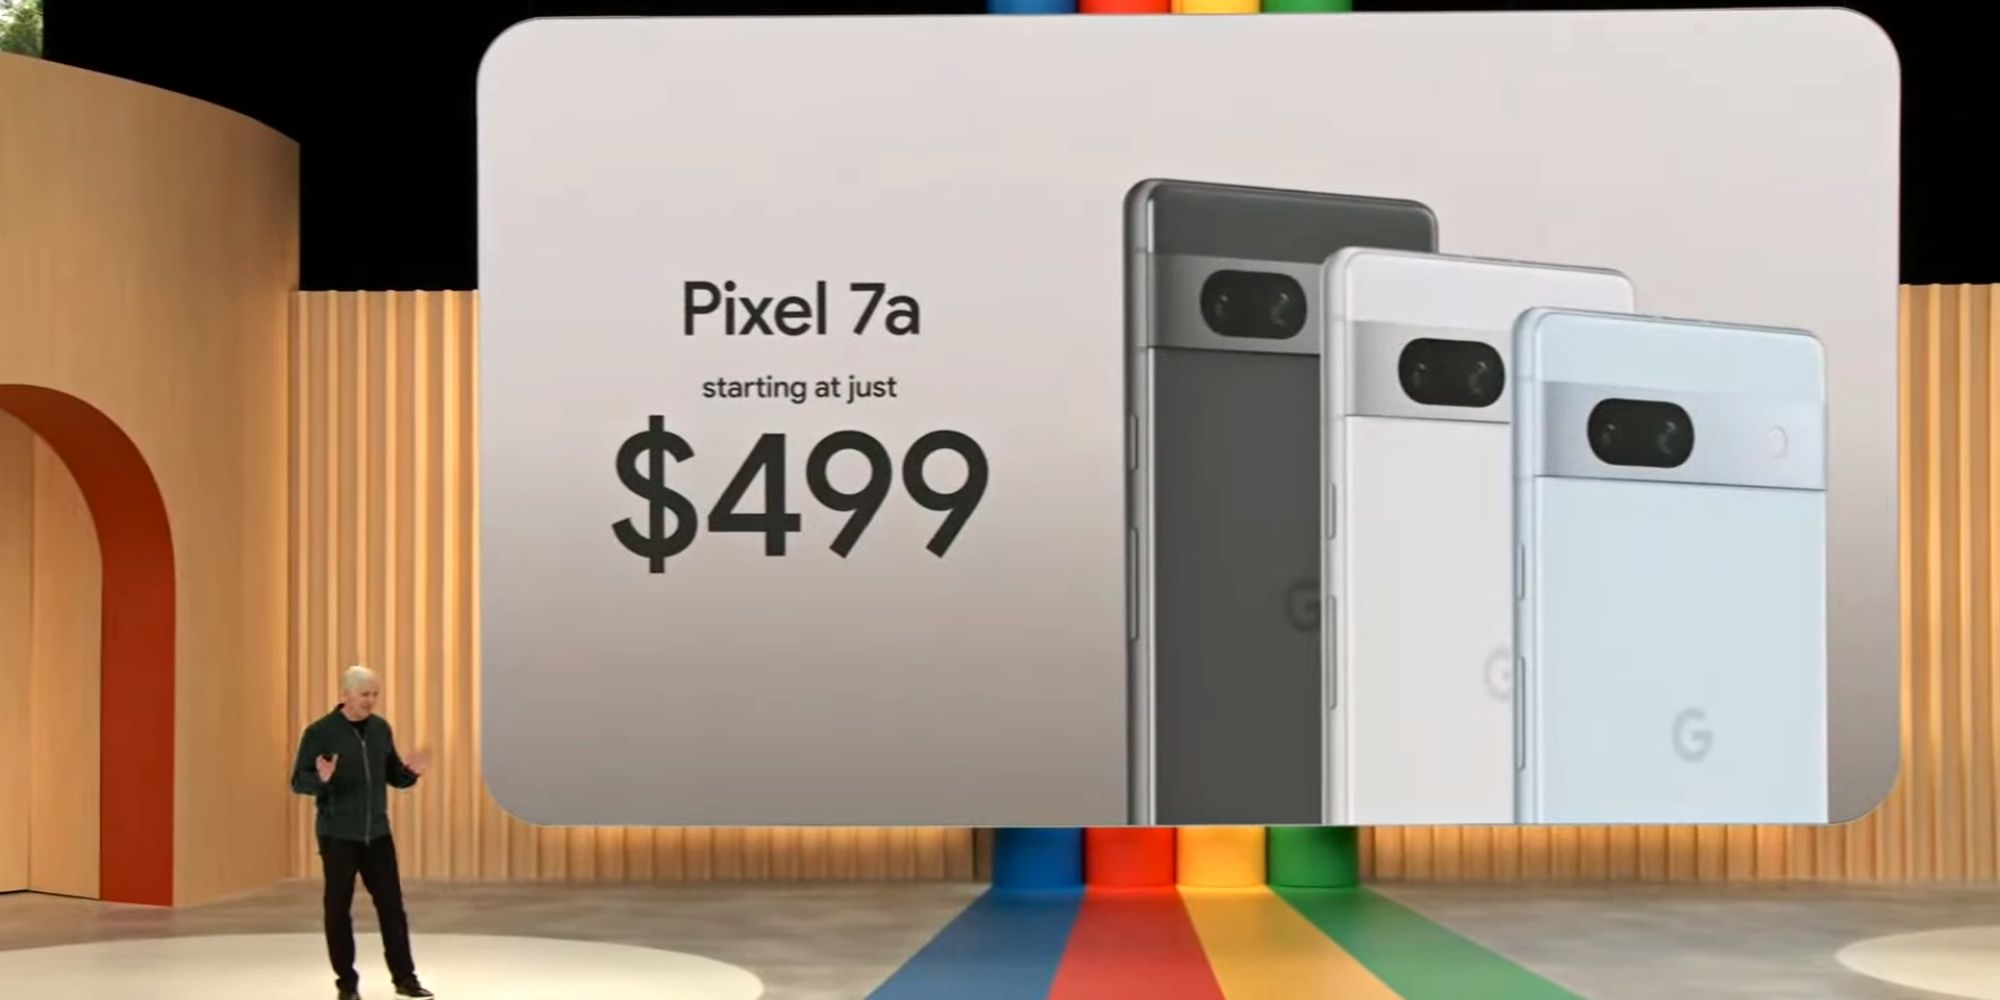 Pixel 7a revealed at the Google IO with price